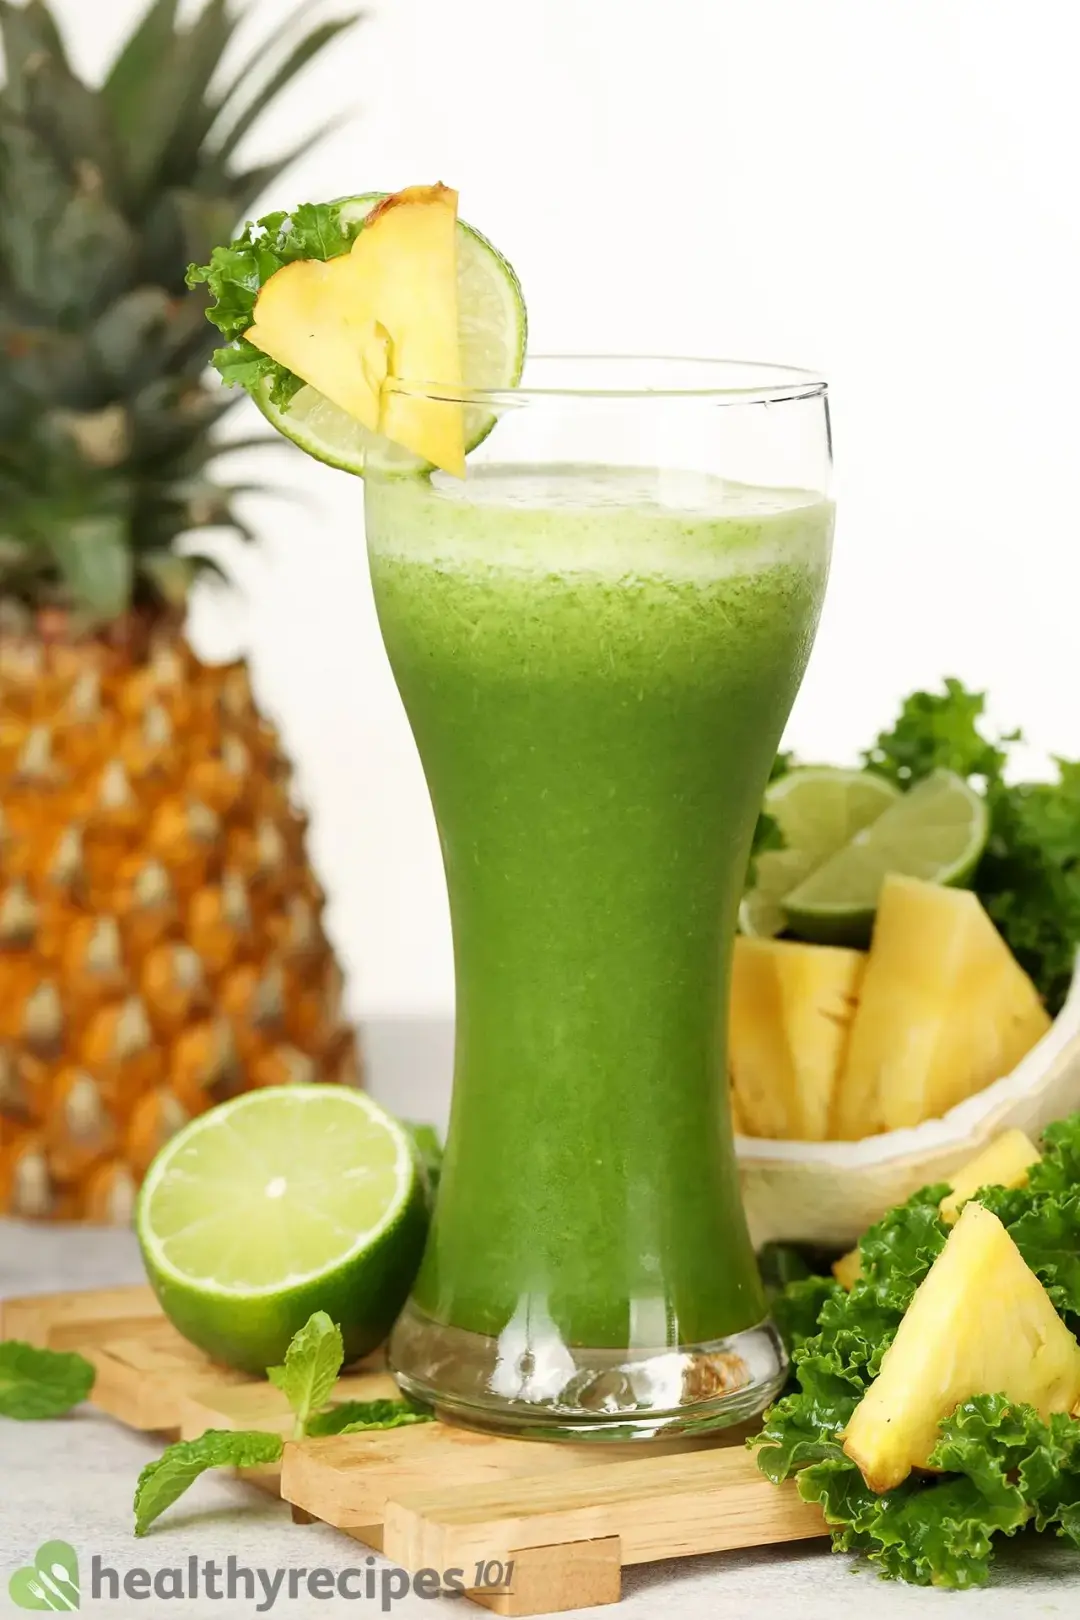 A glass of green mojito smoothie decorated with a slice of pineapple and lime surrounded by ingredients of the smoothie